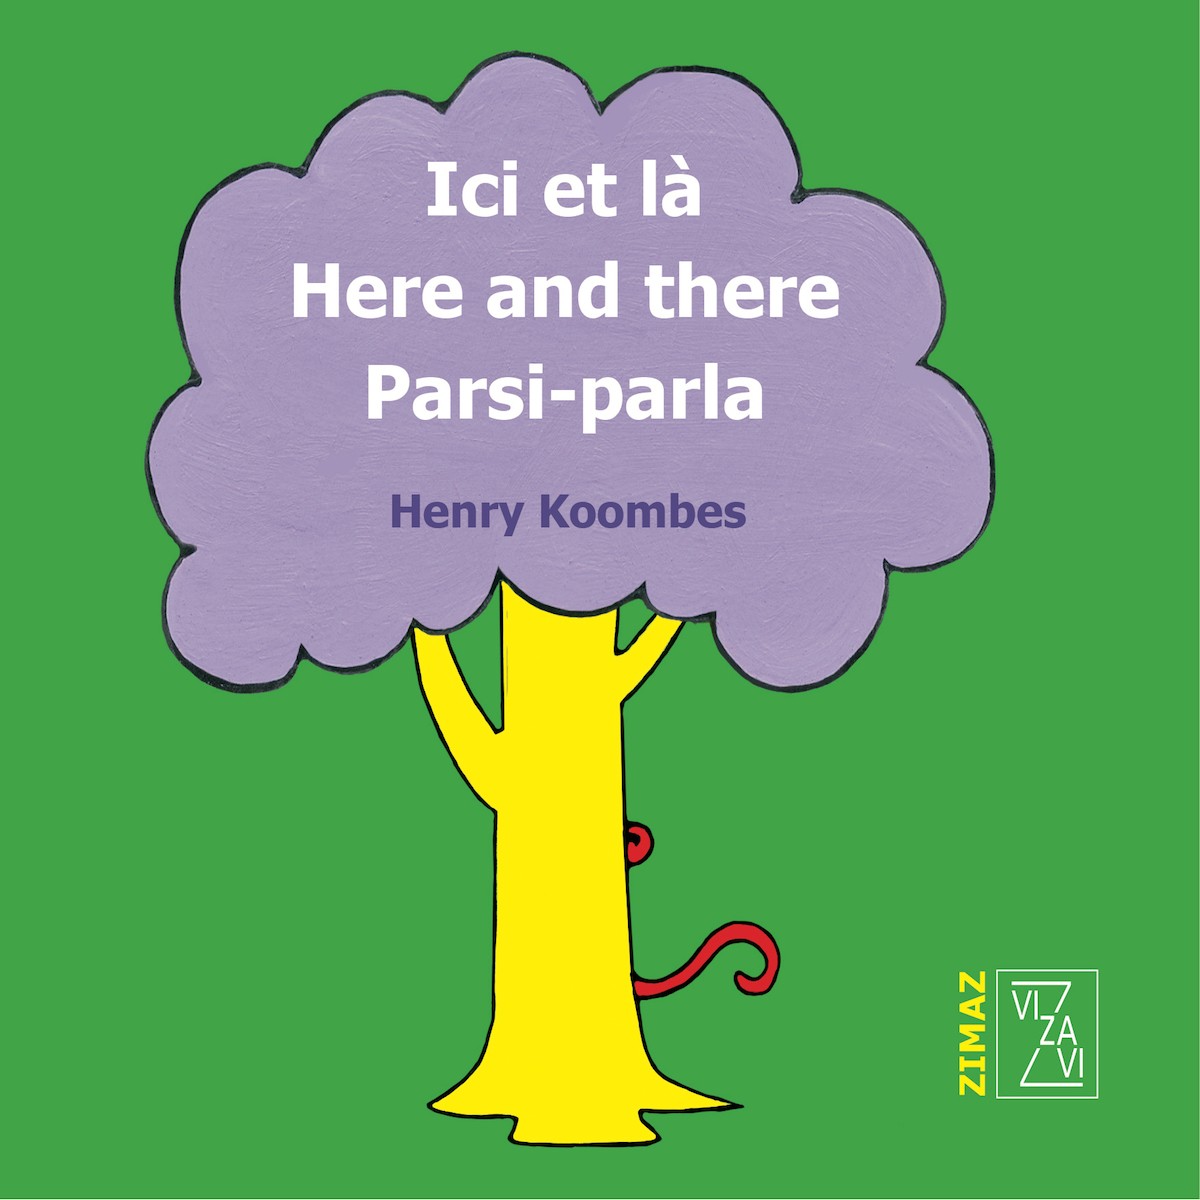 Ici et là – Here and there – Parsi-parla